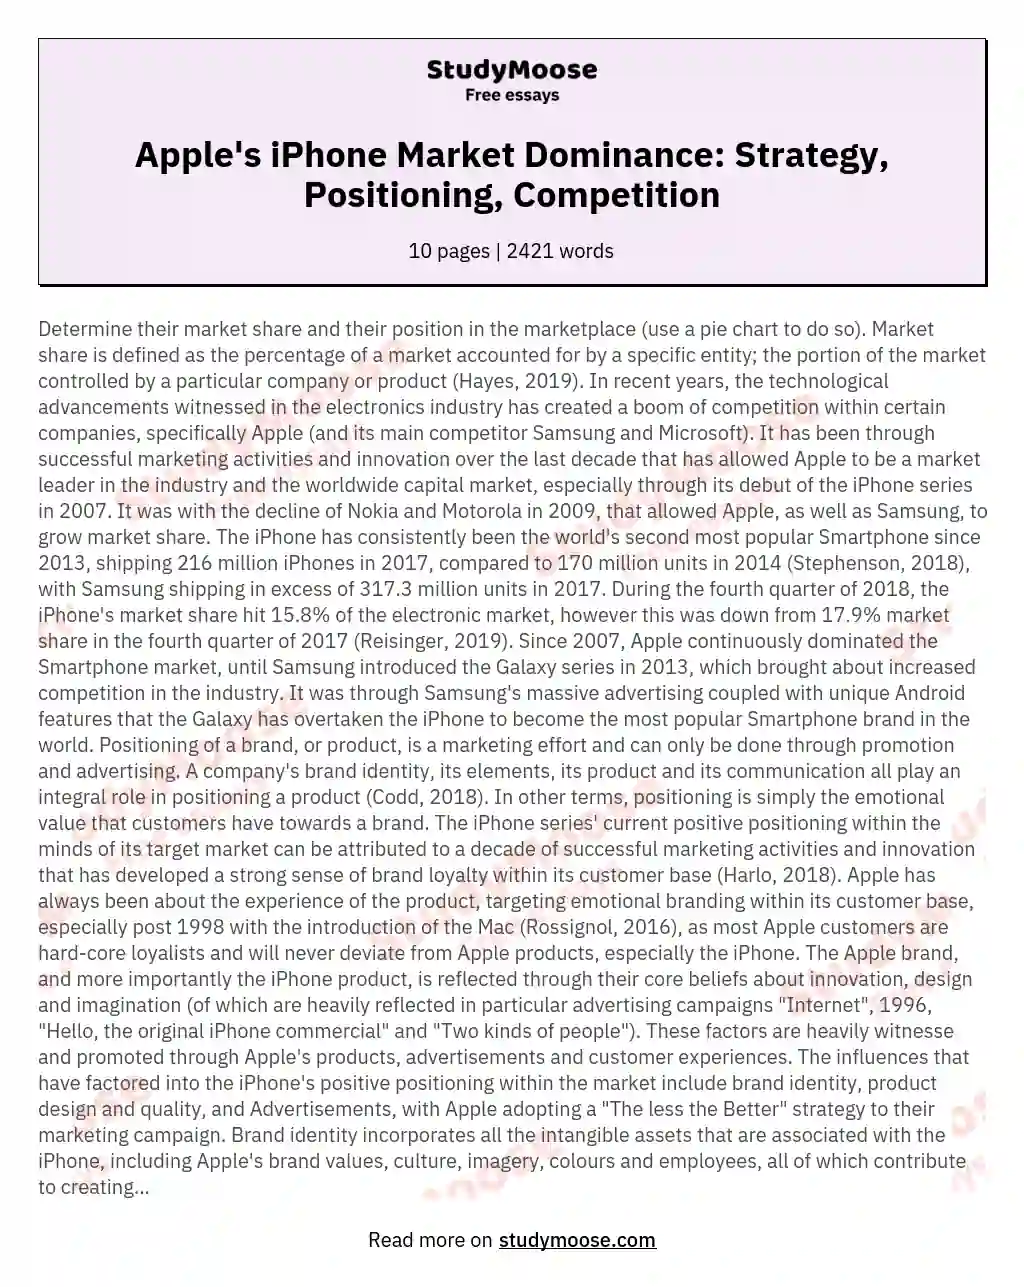 Apple's iPhone Market Dominance: Strategy, Positioning, Competition essay